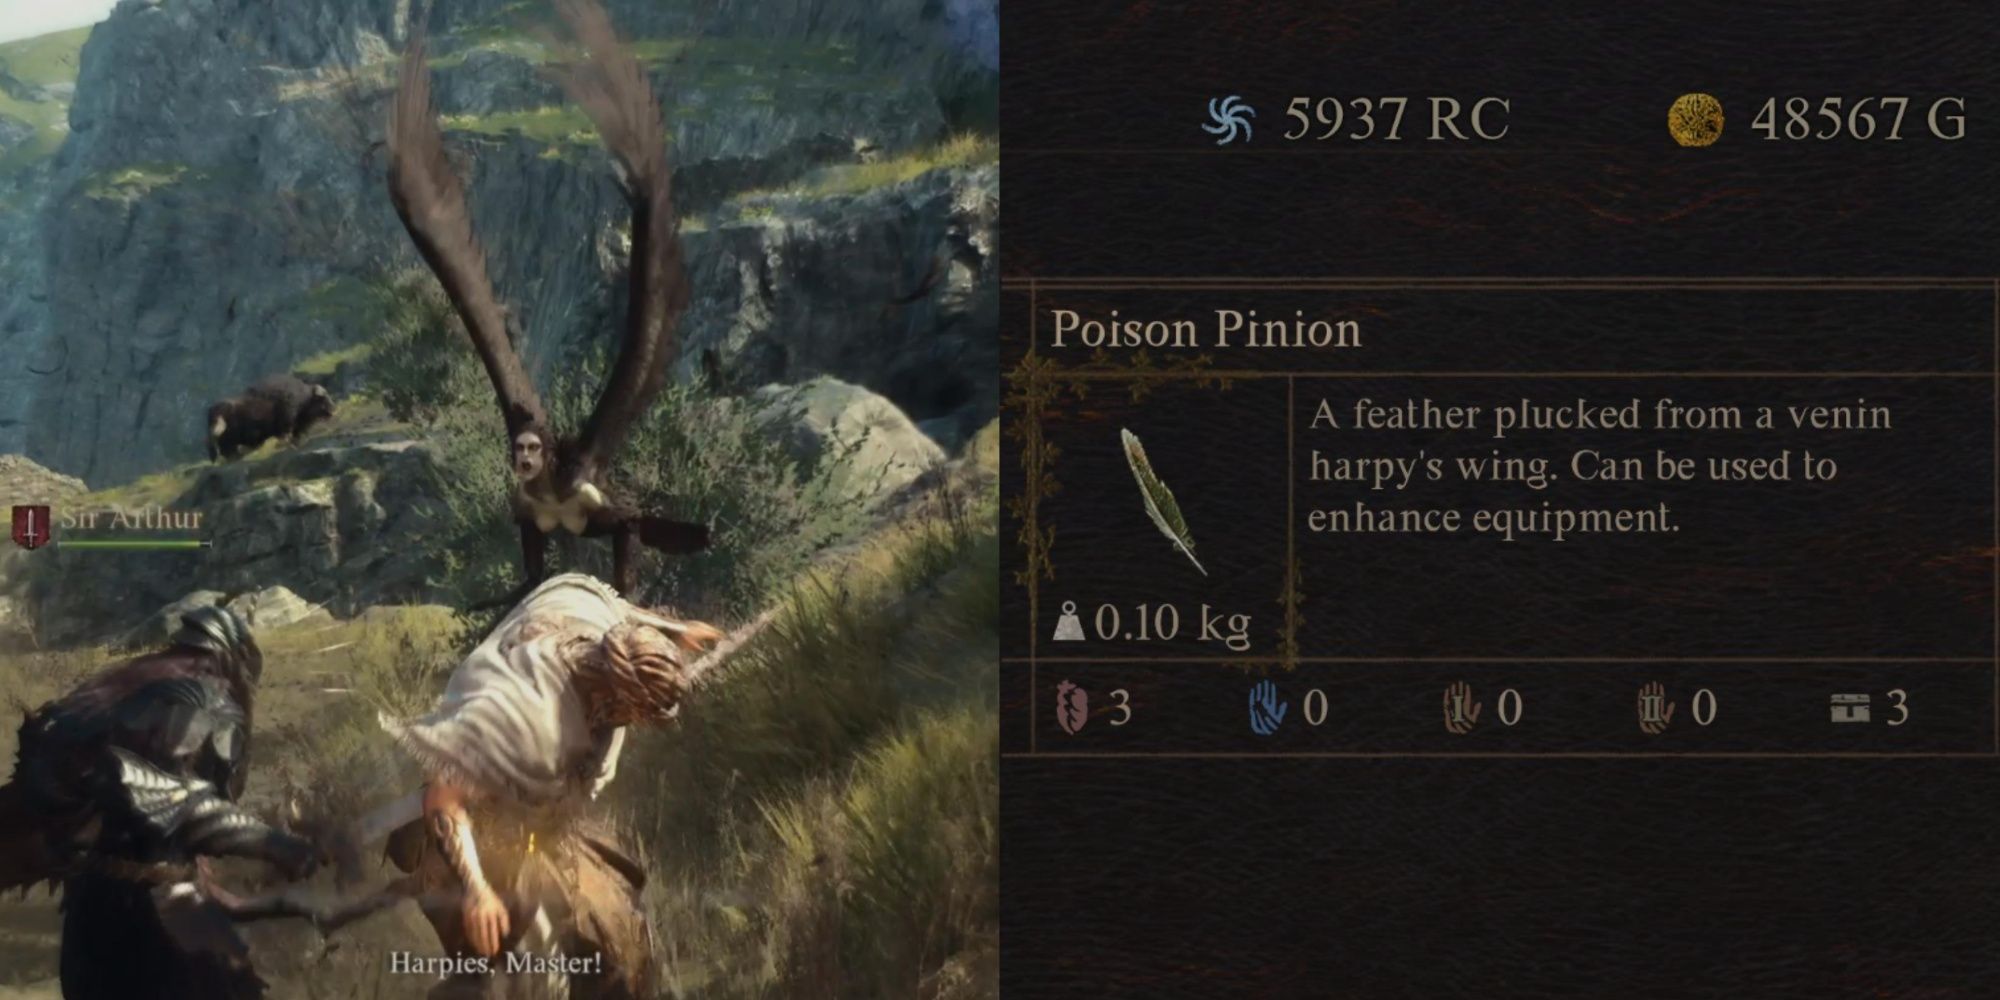 Split image showing Poison Pinion information in Dragon's Dogma 2